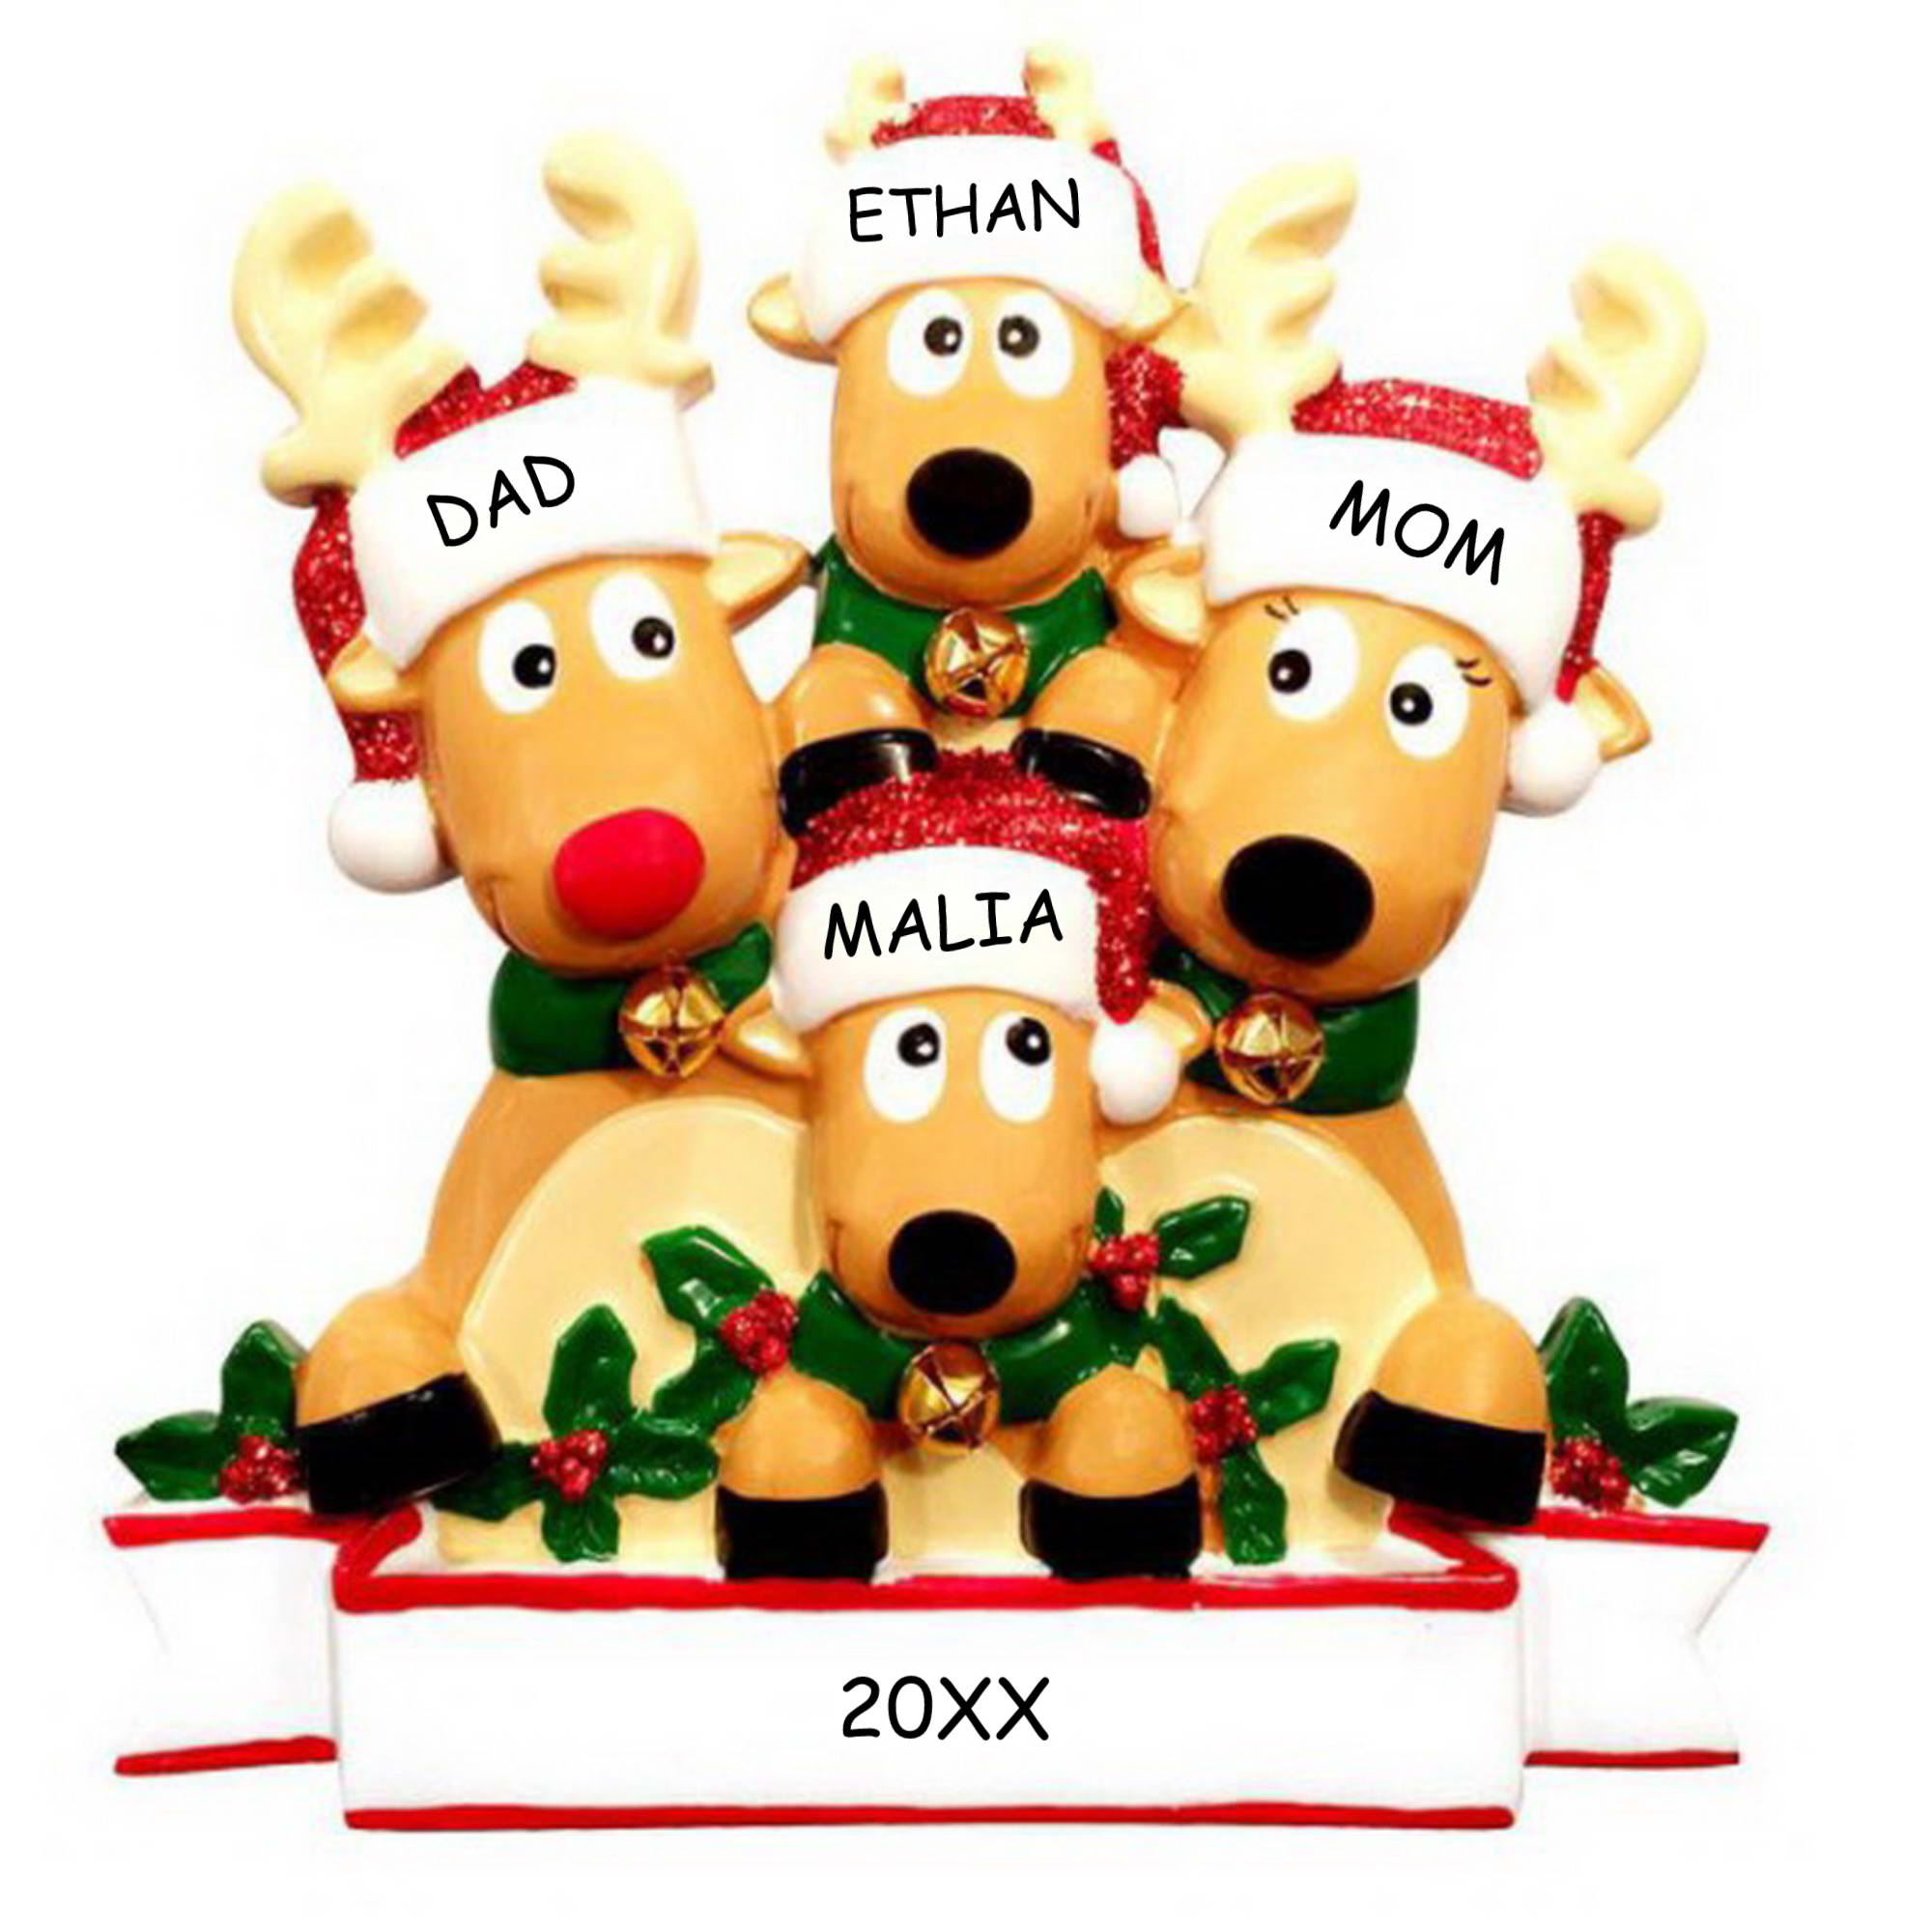 Personalized Cozy Reindeer Family Christmas Ornament - Family of 4